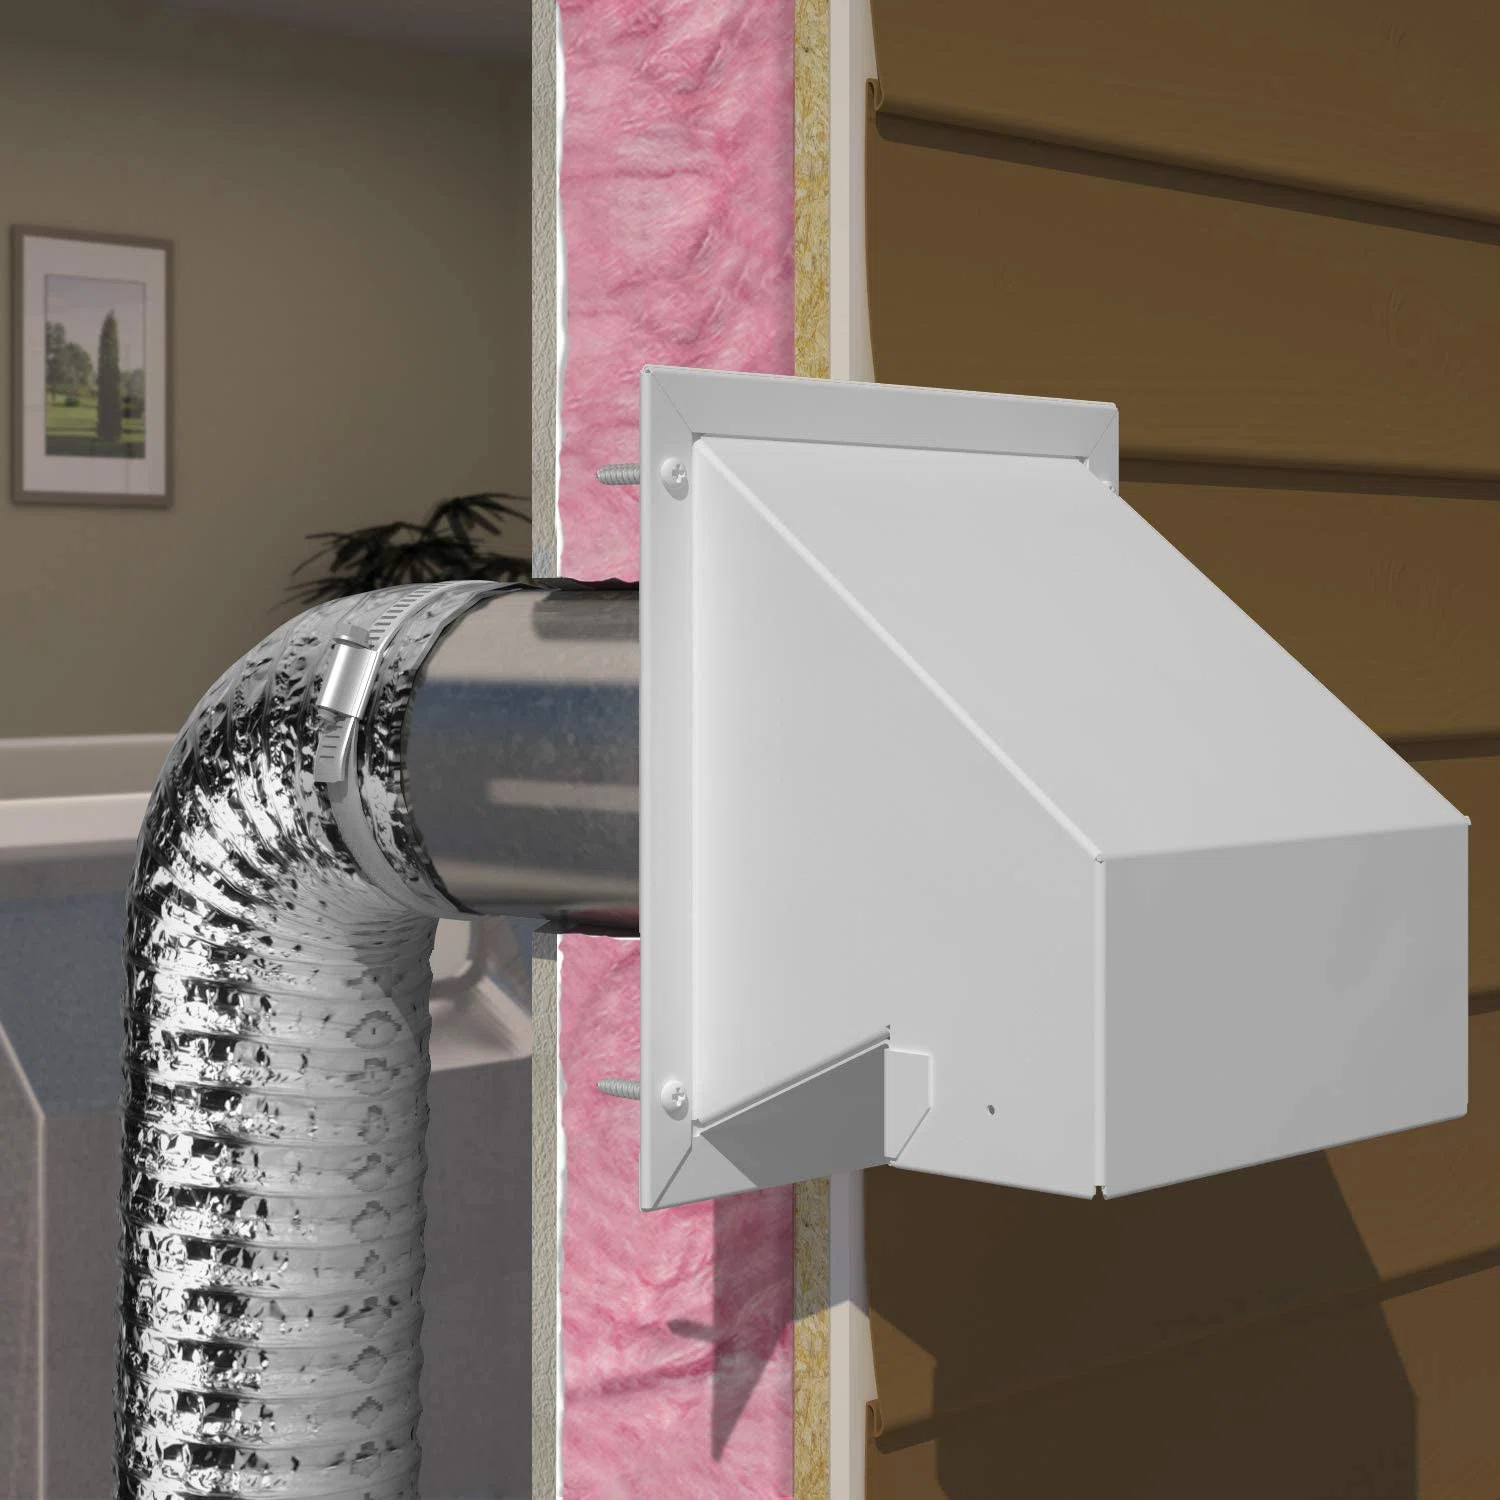 How Do I Keep My Dryer Vent From Falling Off